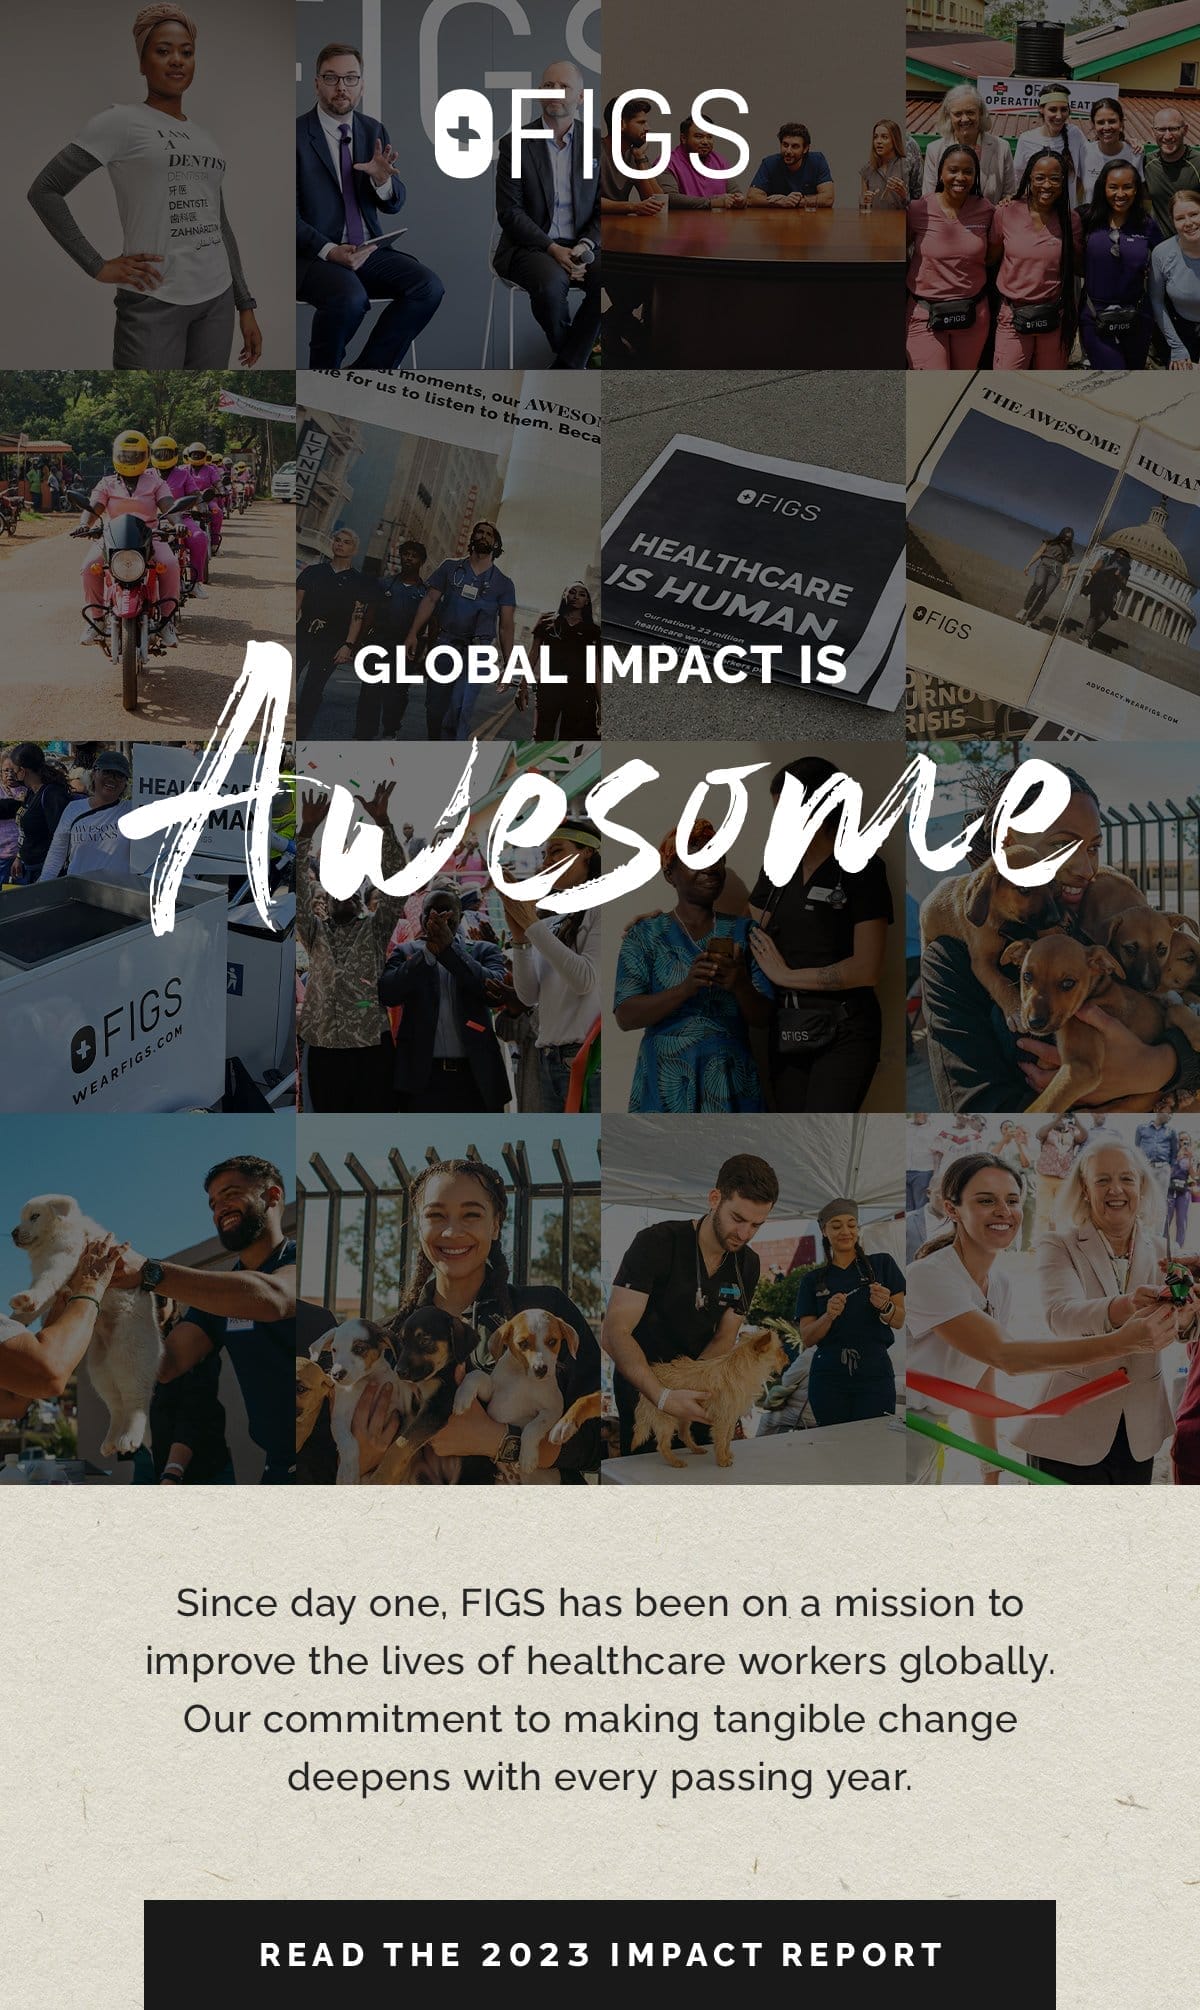 Global impact is Awesome.